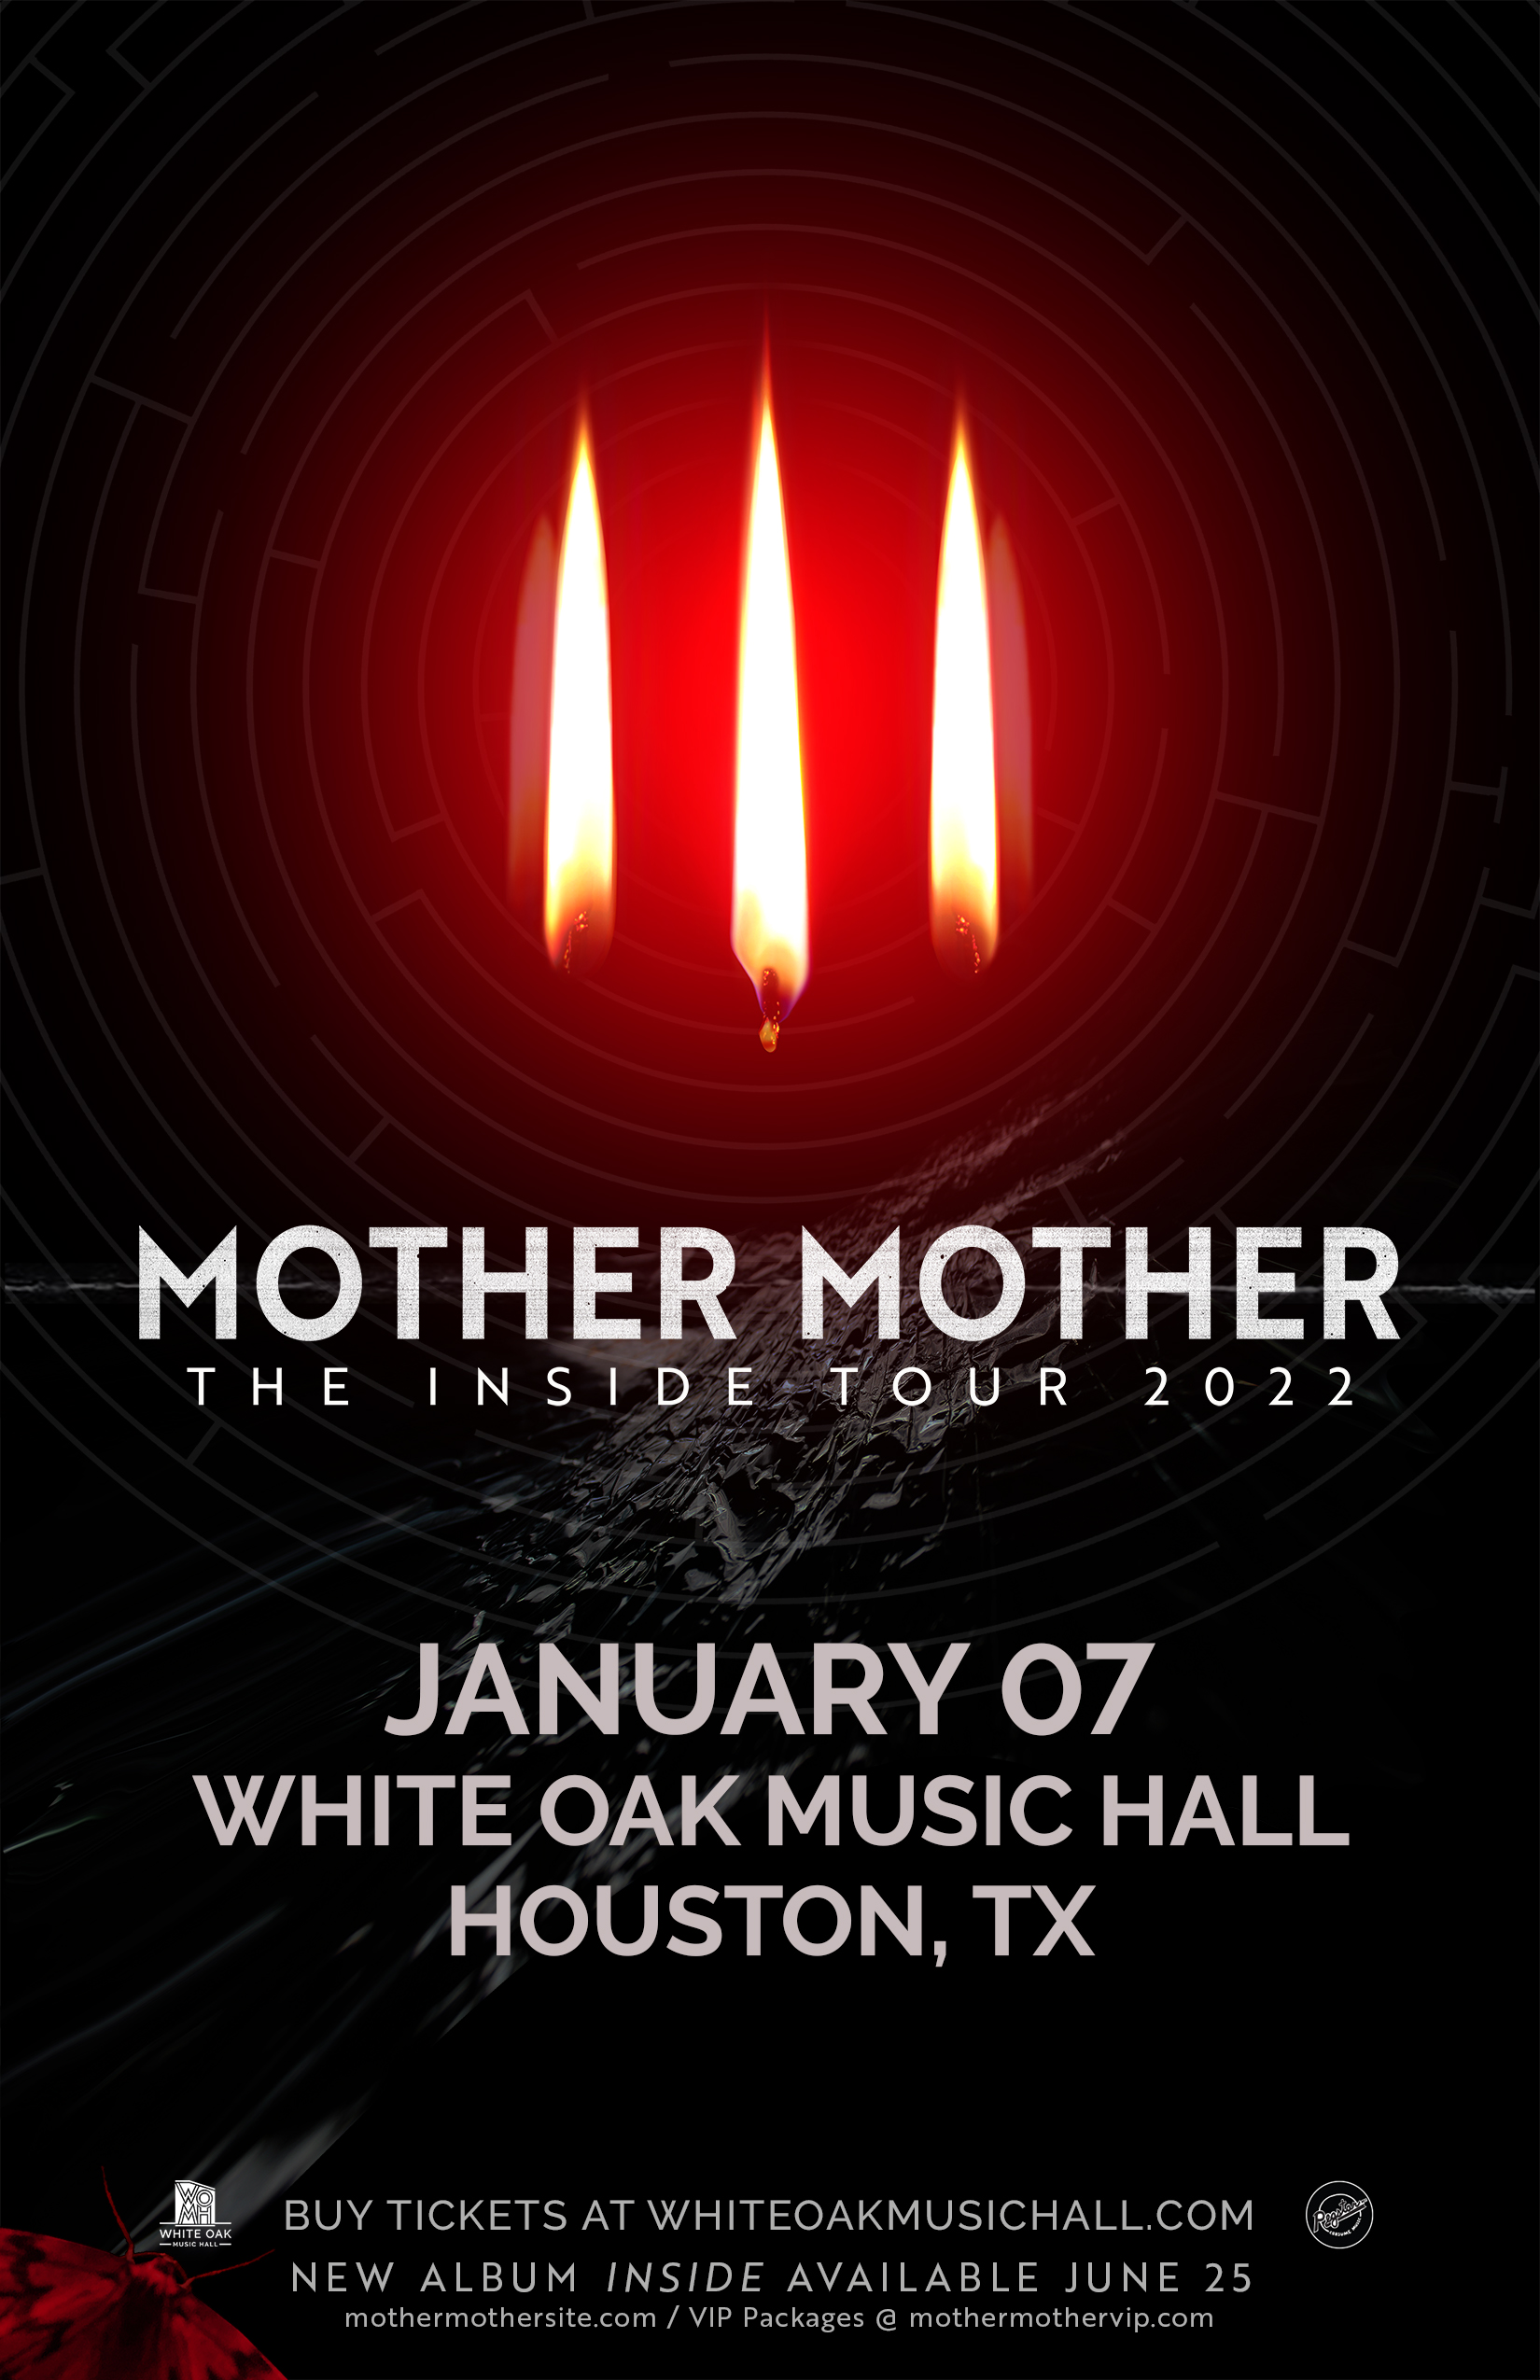 Buy Tickets To Mother Mother The Inside Tour 2022 In Houston On Jan 07 2022